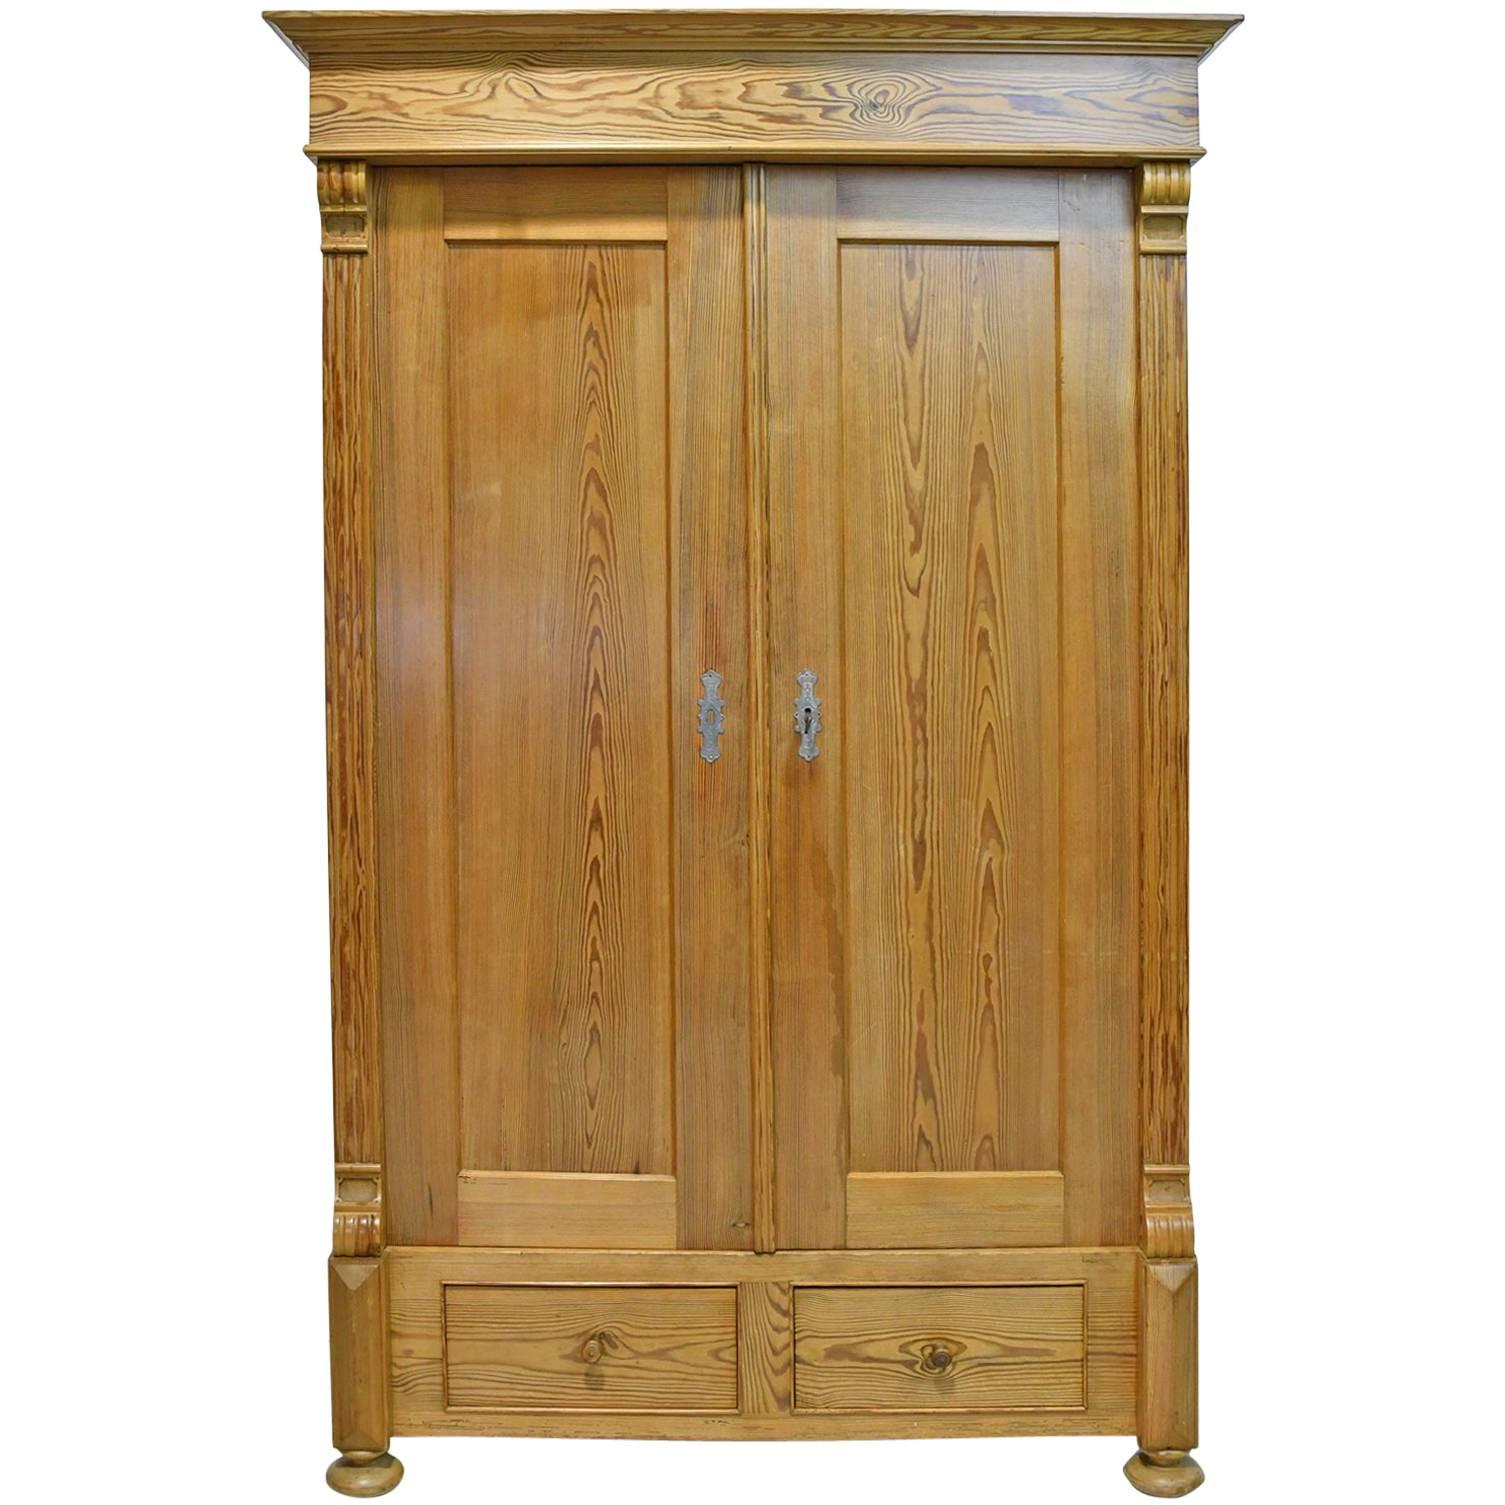 19th Century European Two-Door Pine Armoire with Drawers and Retractable Doors